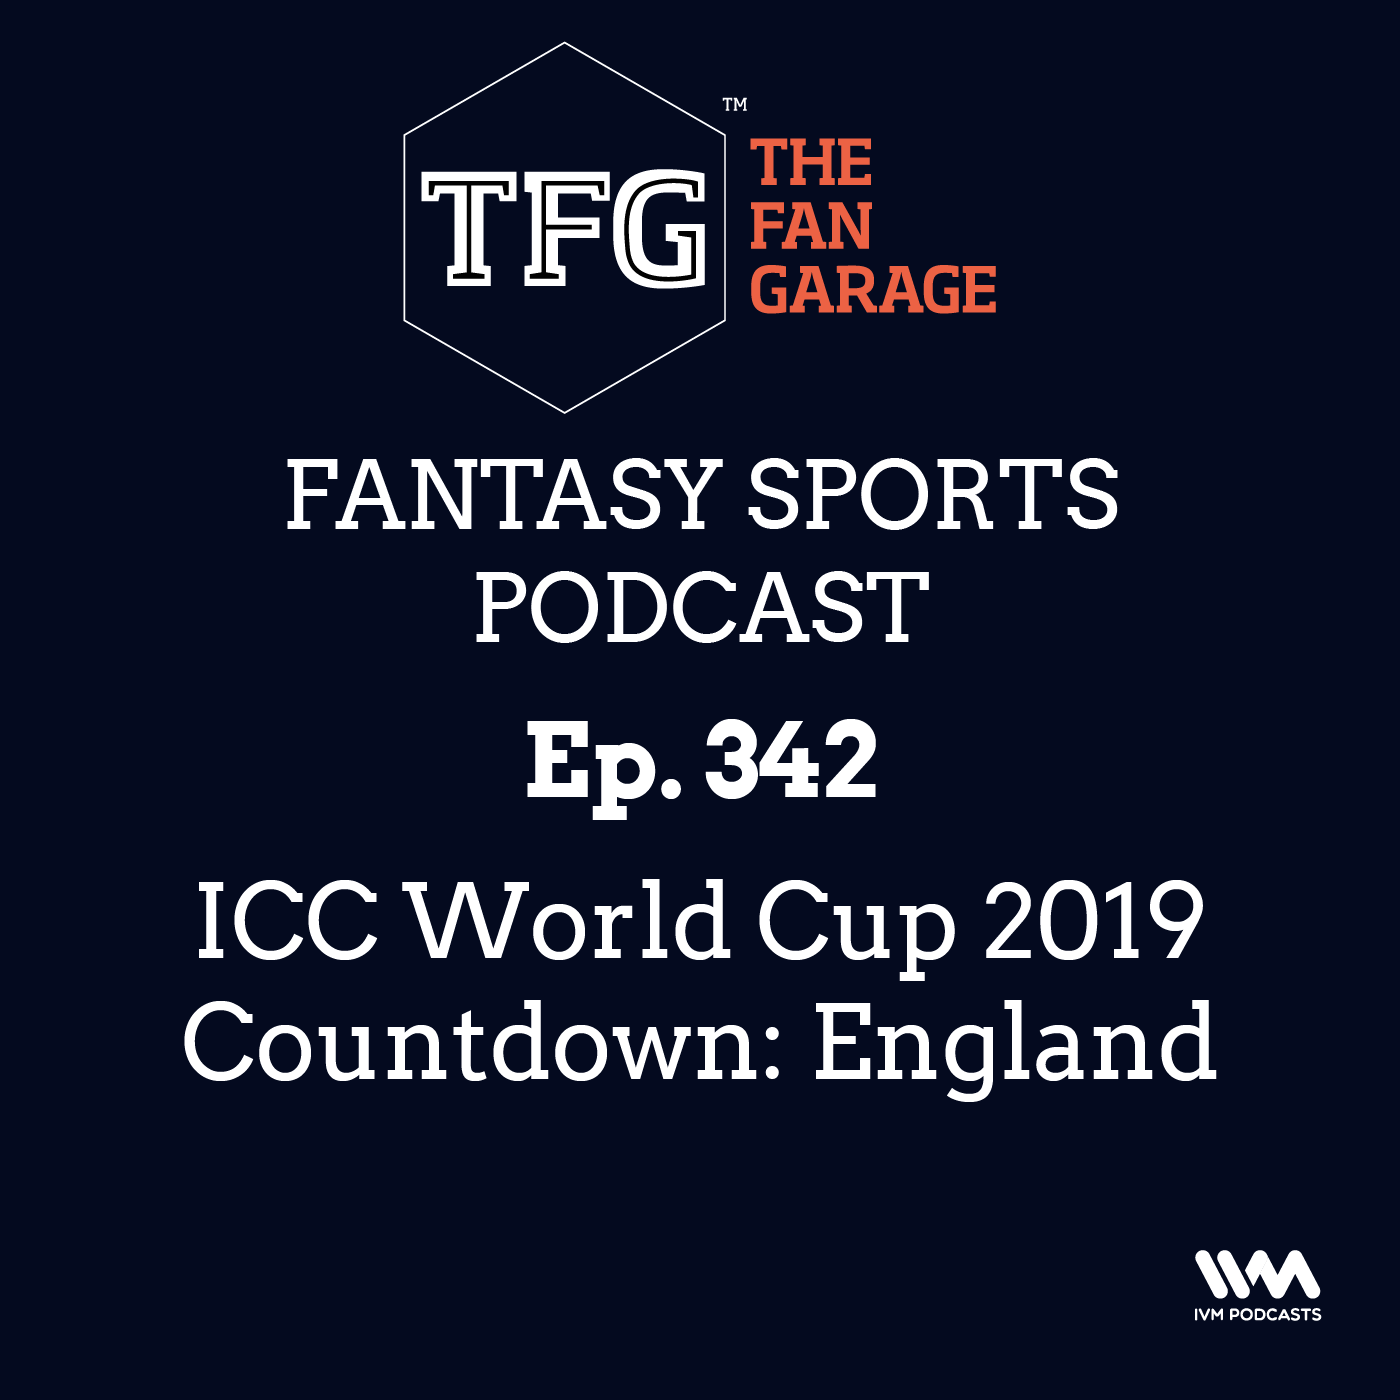 TFG Fantasy Sports Podcast Ep. 342: ICC World Cup 2019 Countdown: England